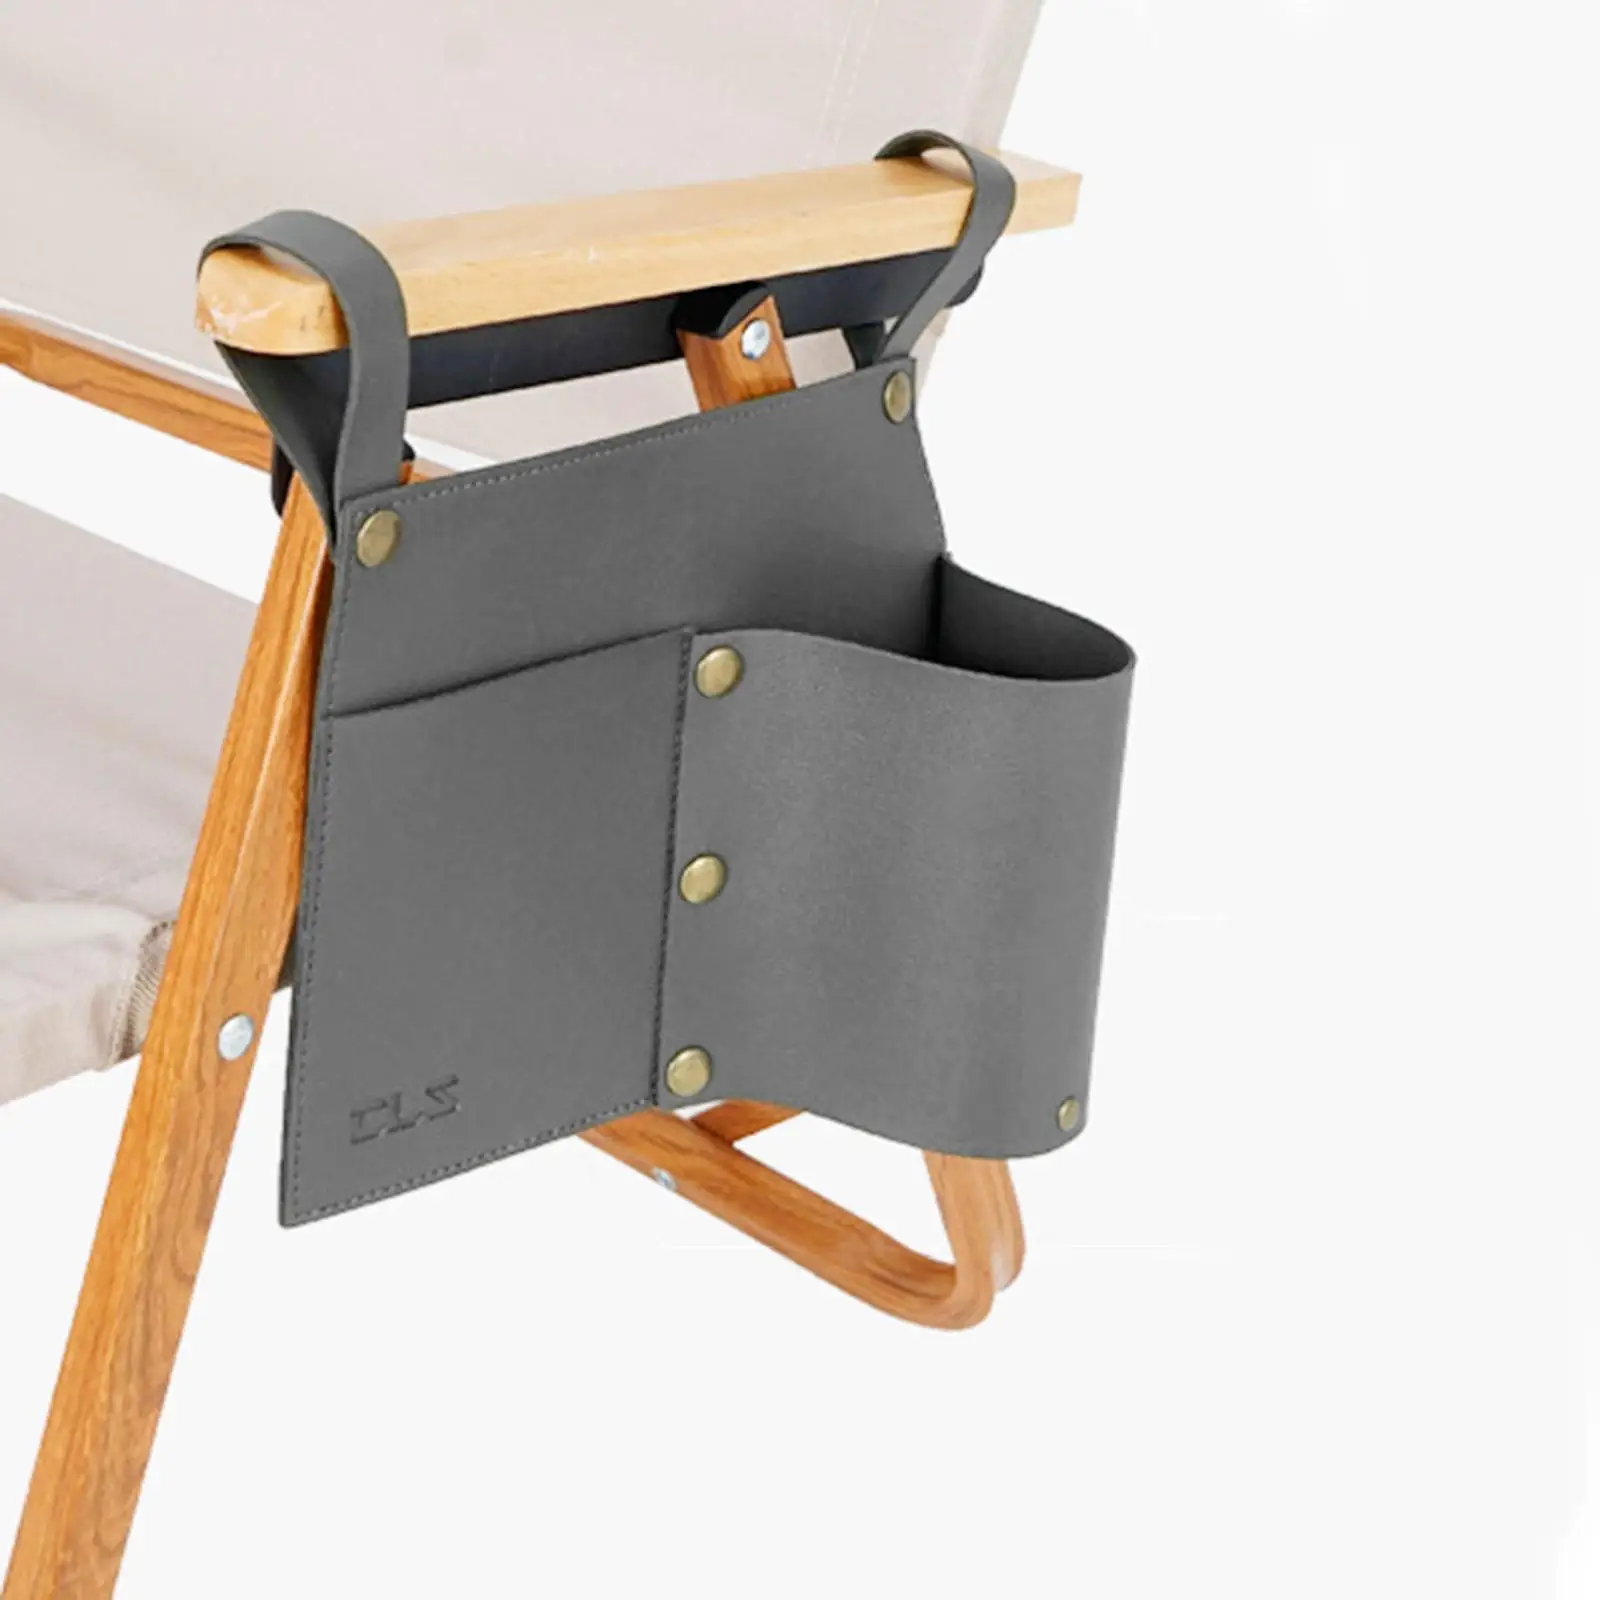 Camping Chair Armrest Organizer Seat Side Arm Magazine Pouch